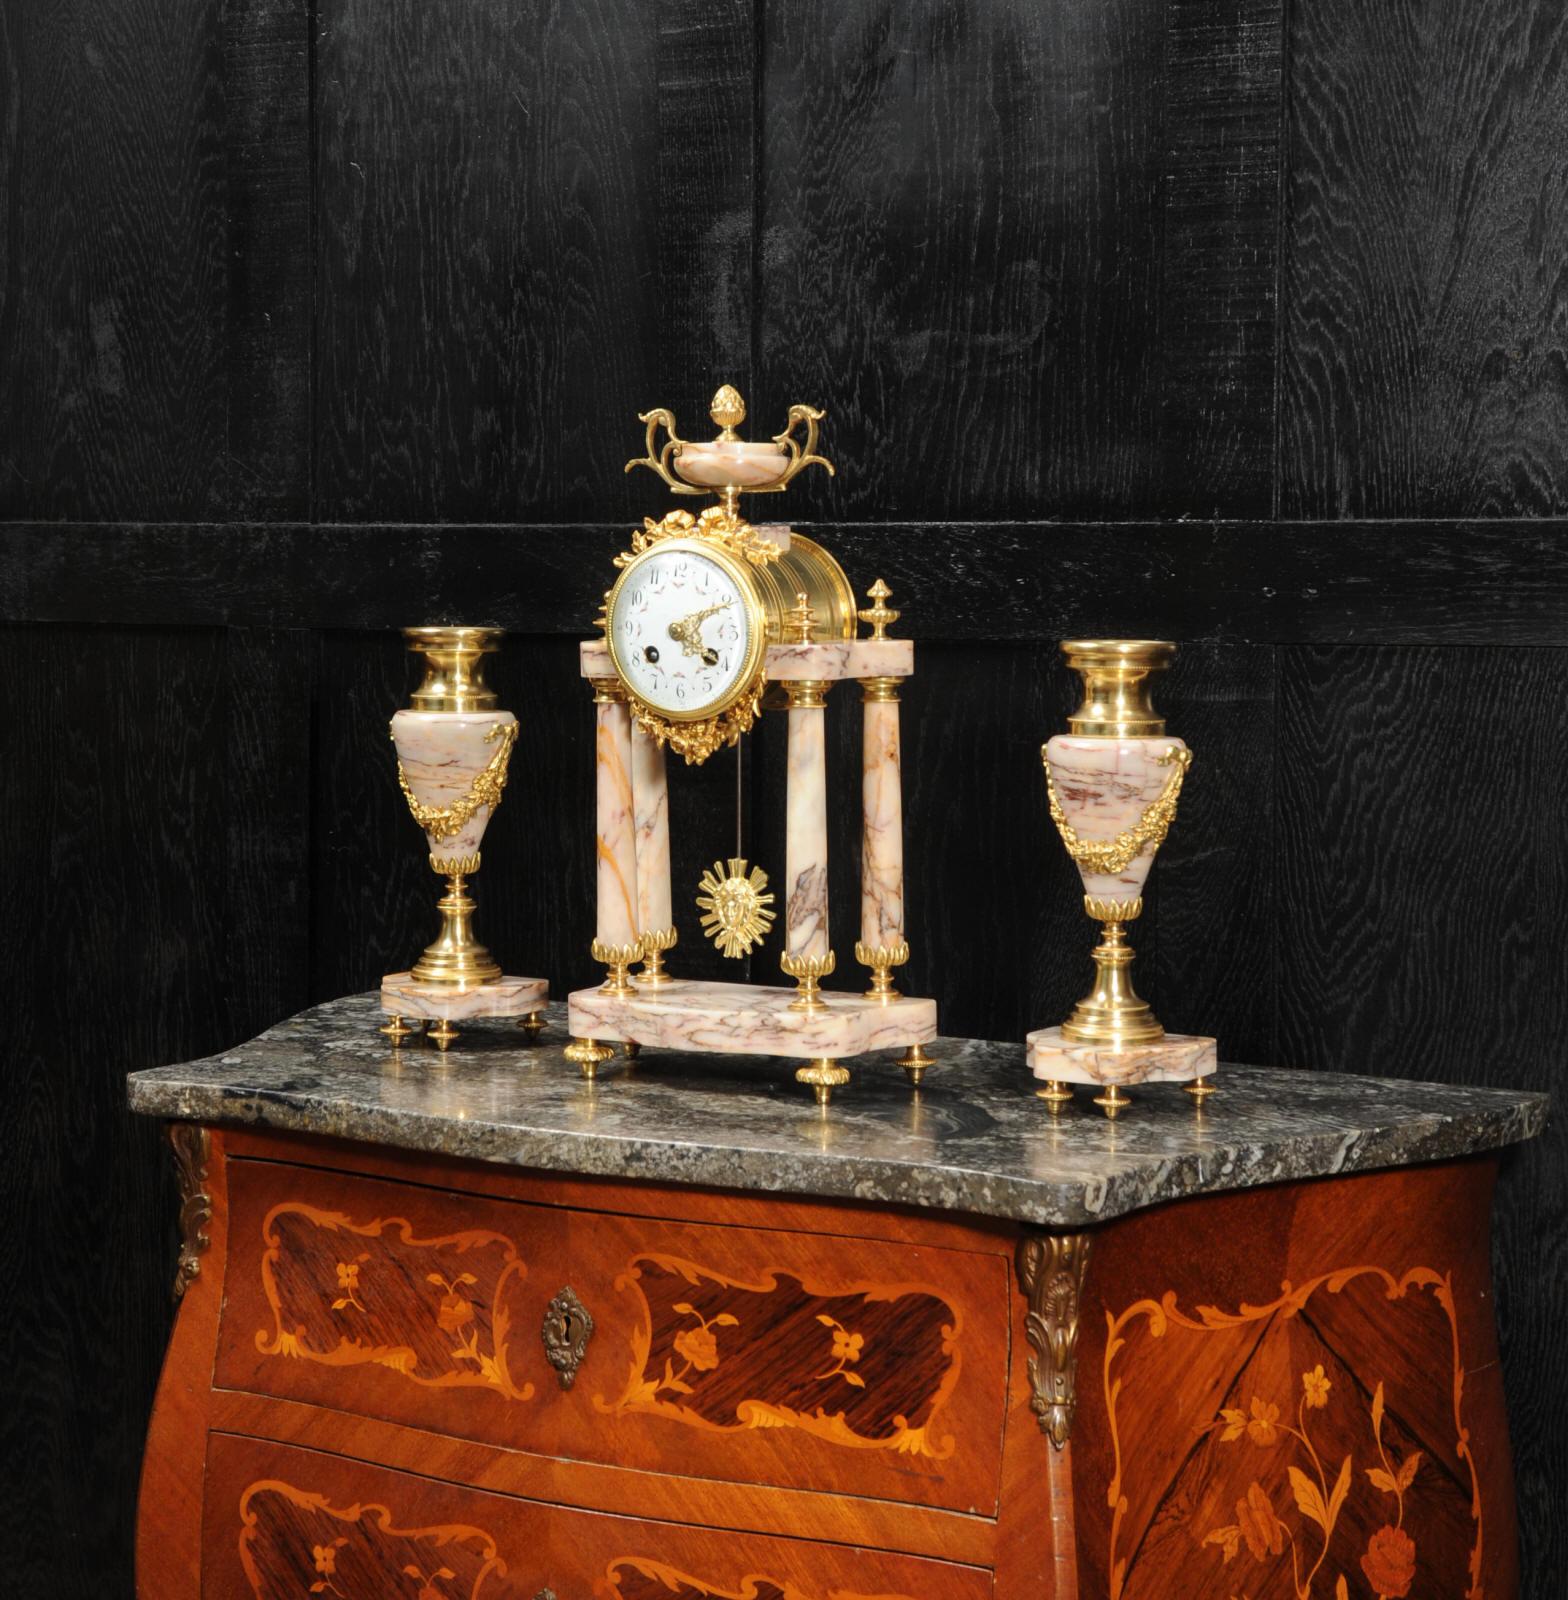 A beautiful antique French portico clock set, circa 1900. It is of Louis XVI style and made of a stunning variegated specimen marble, mounted with ormolu (finely gilded bronze). The marble is veined with oranges, pinks, violets and blues. The